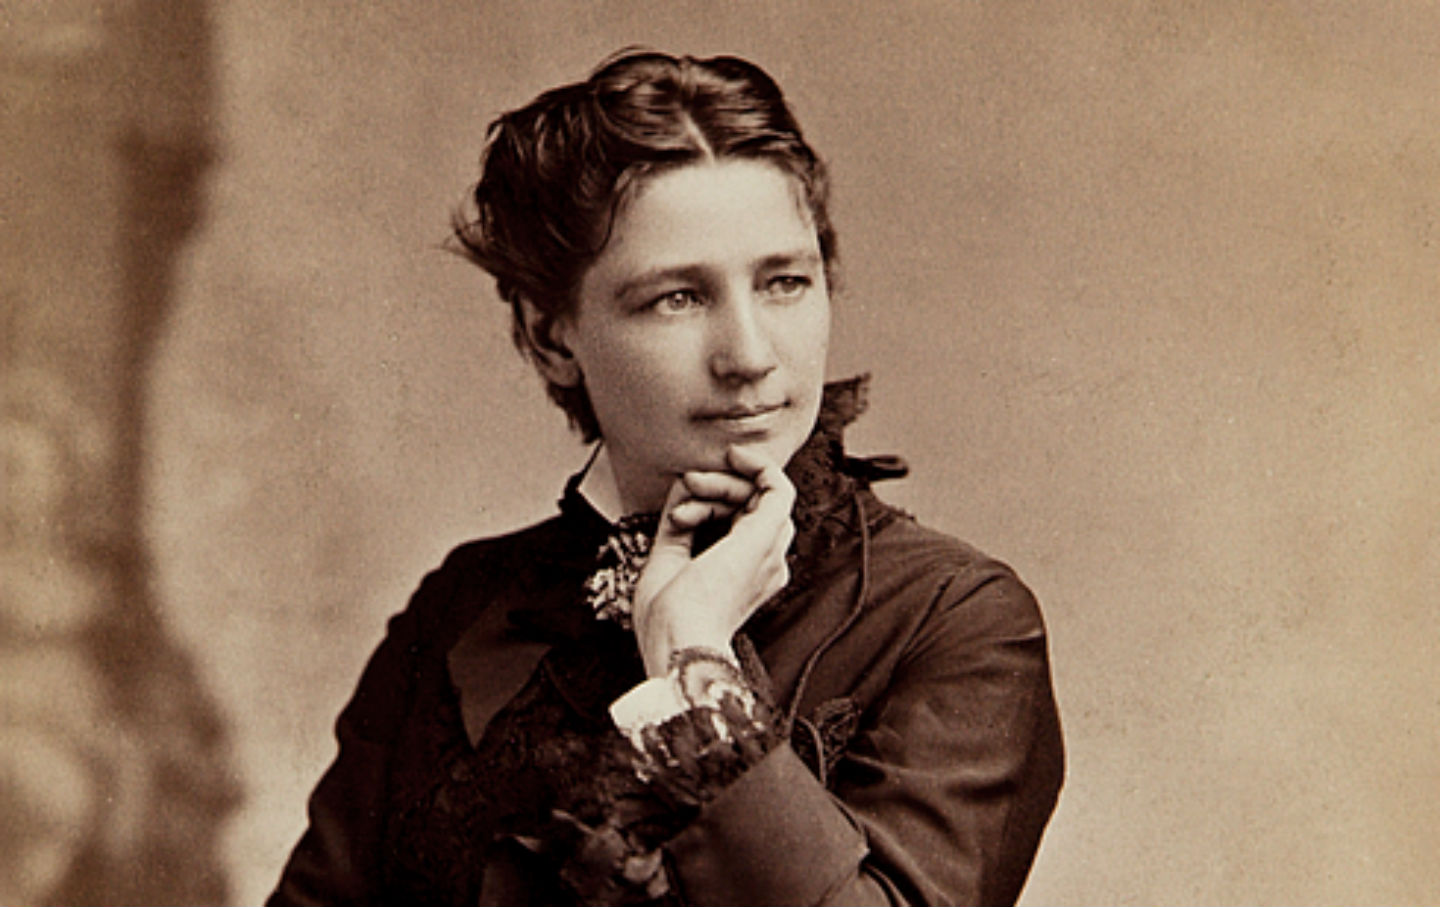 Victoria Woodhull was the first woman to run for president in 1872, against Ulysses S. Grant.